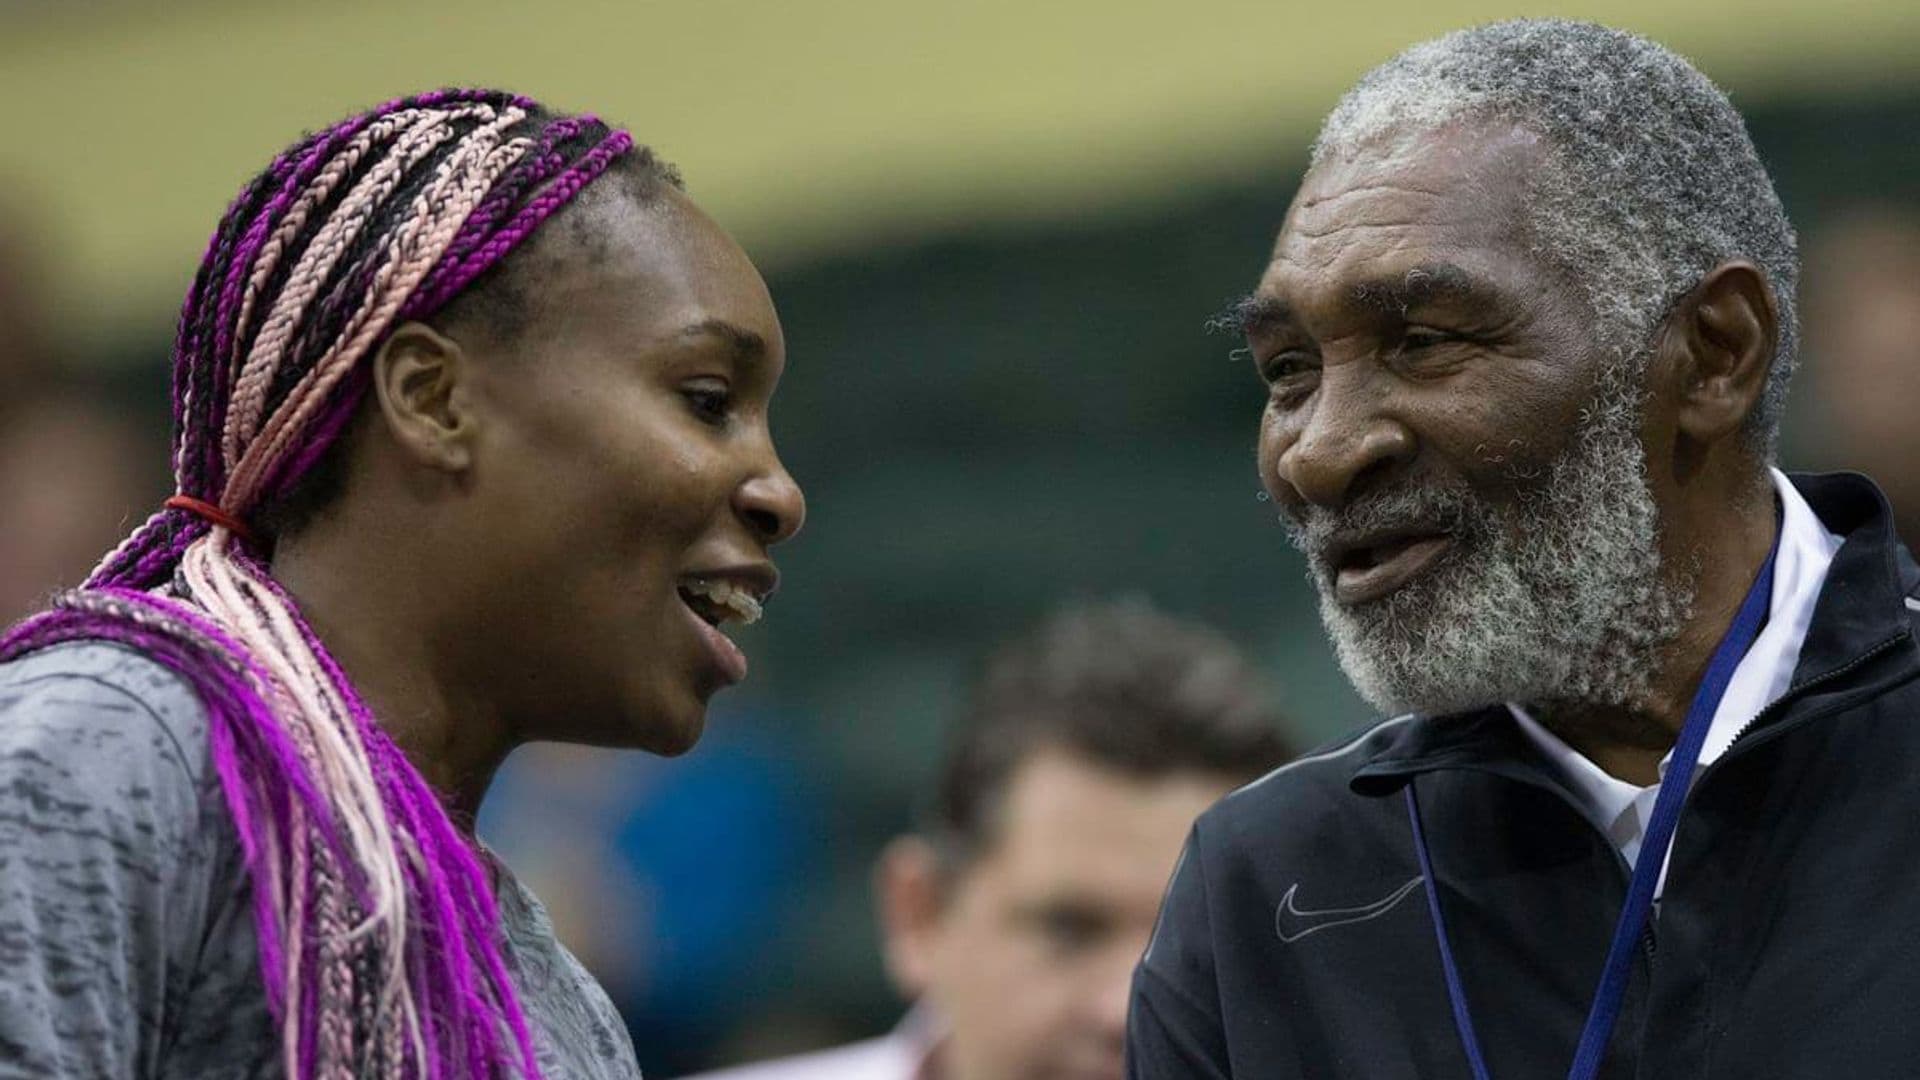 Venus Williams shares adorable throwback photo with her dad